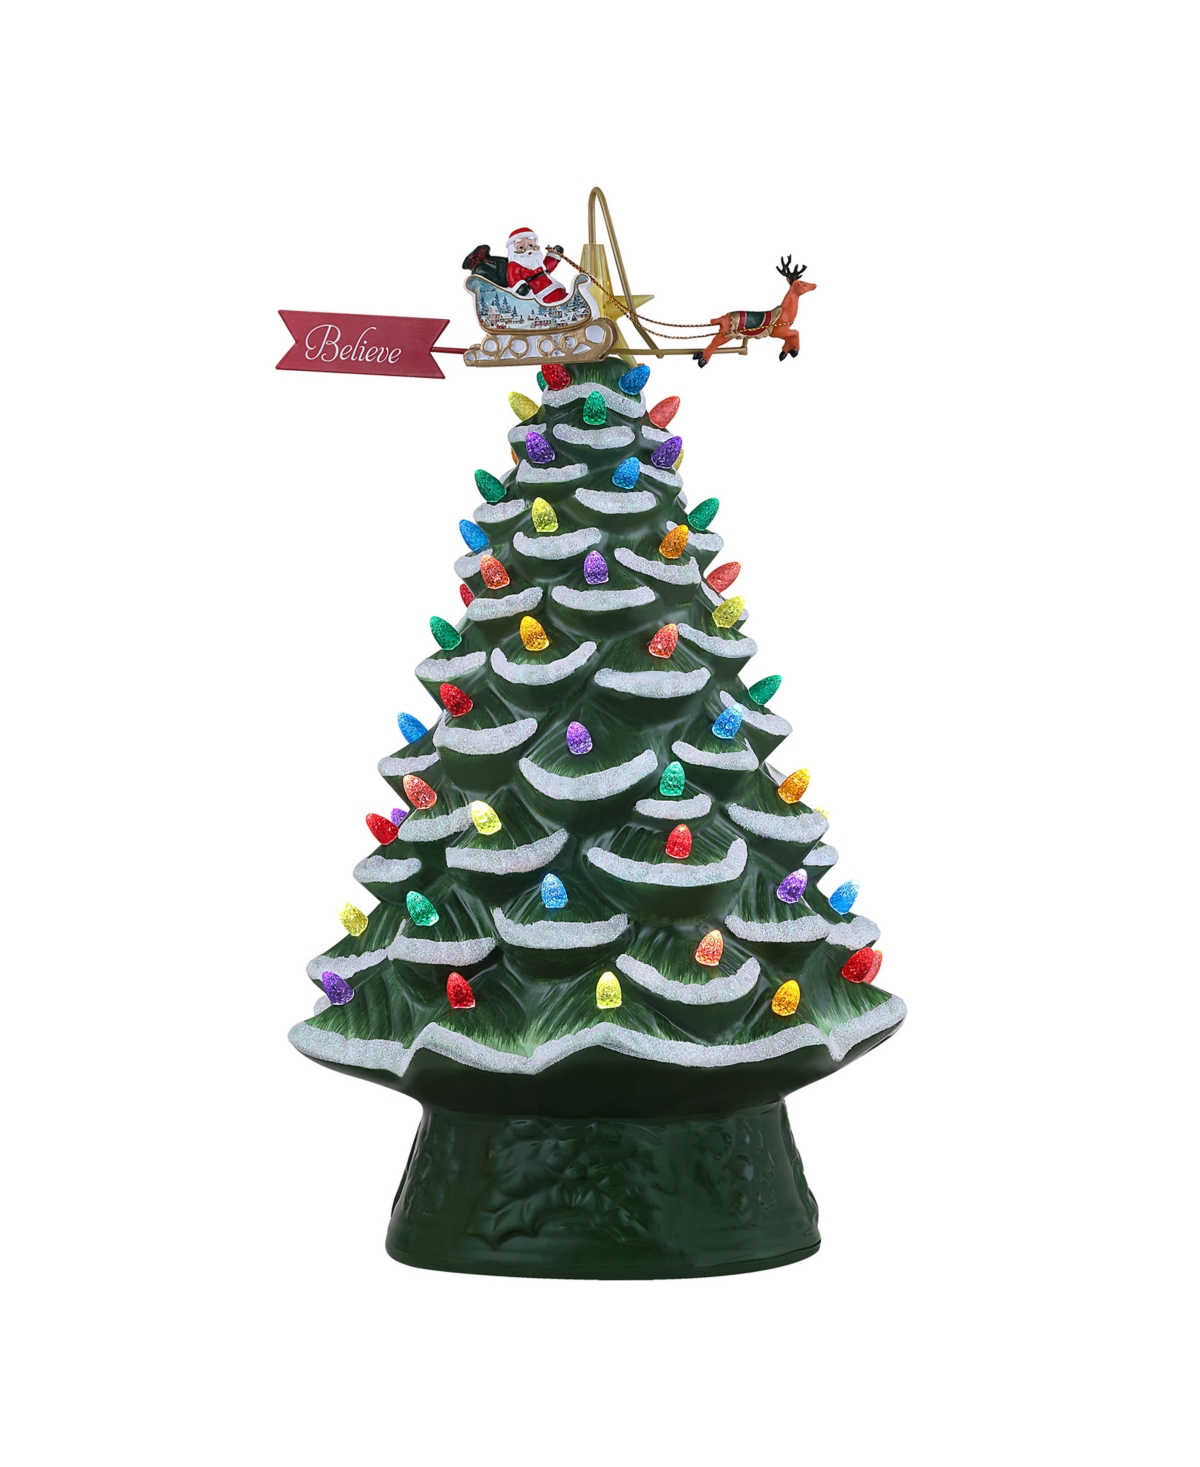 Mr. Christmas 90th Anniversary Collection 16" Lit Ceramic Tree With Animated Santa's Sleigh In Green